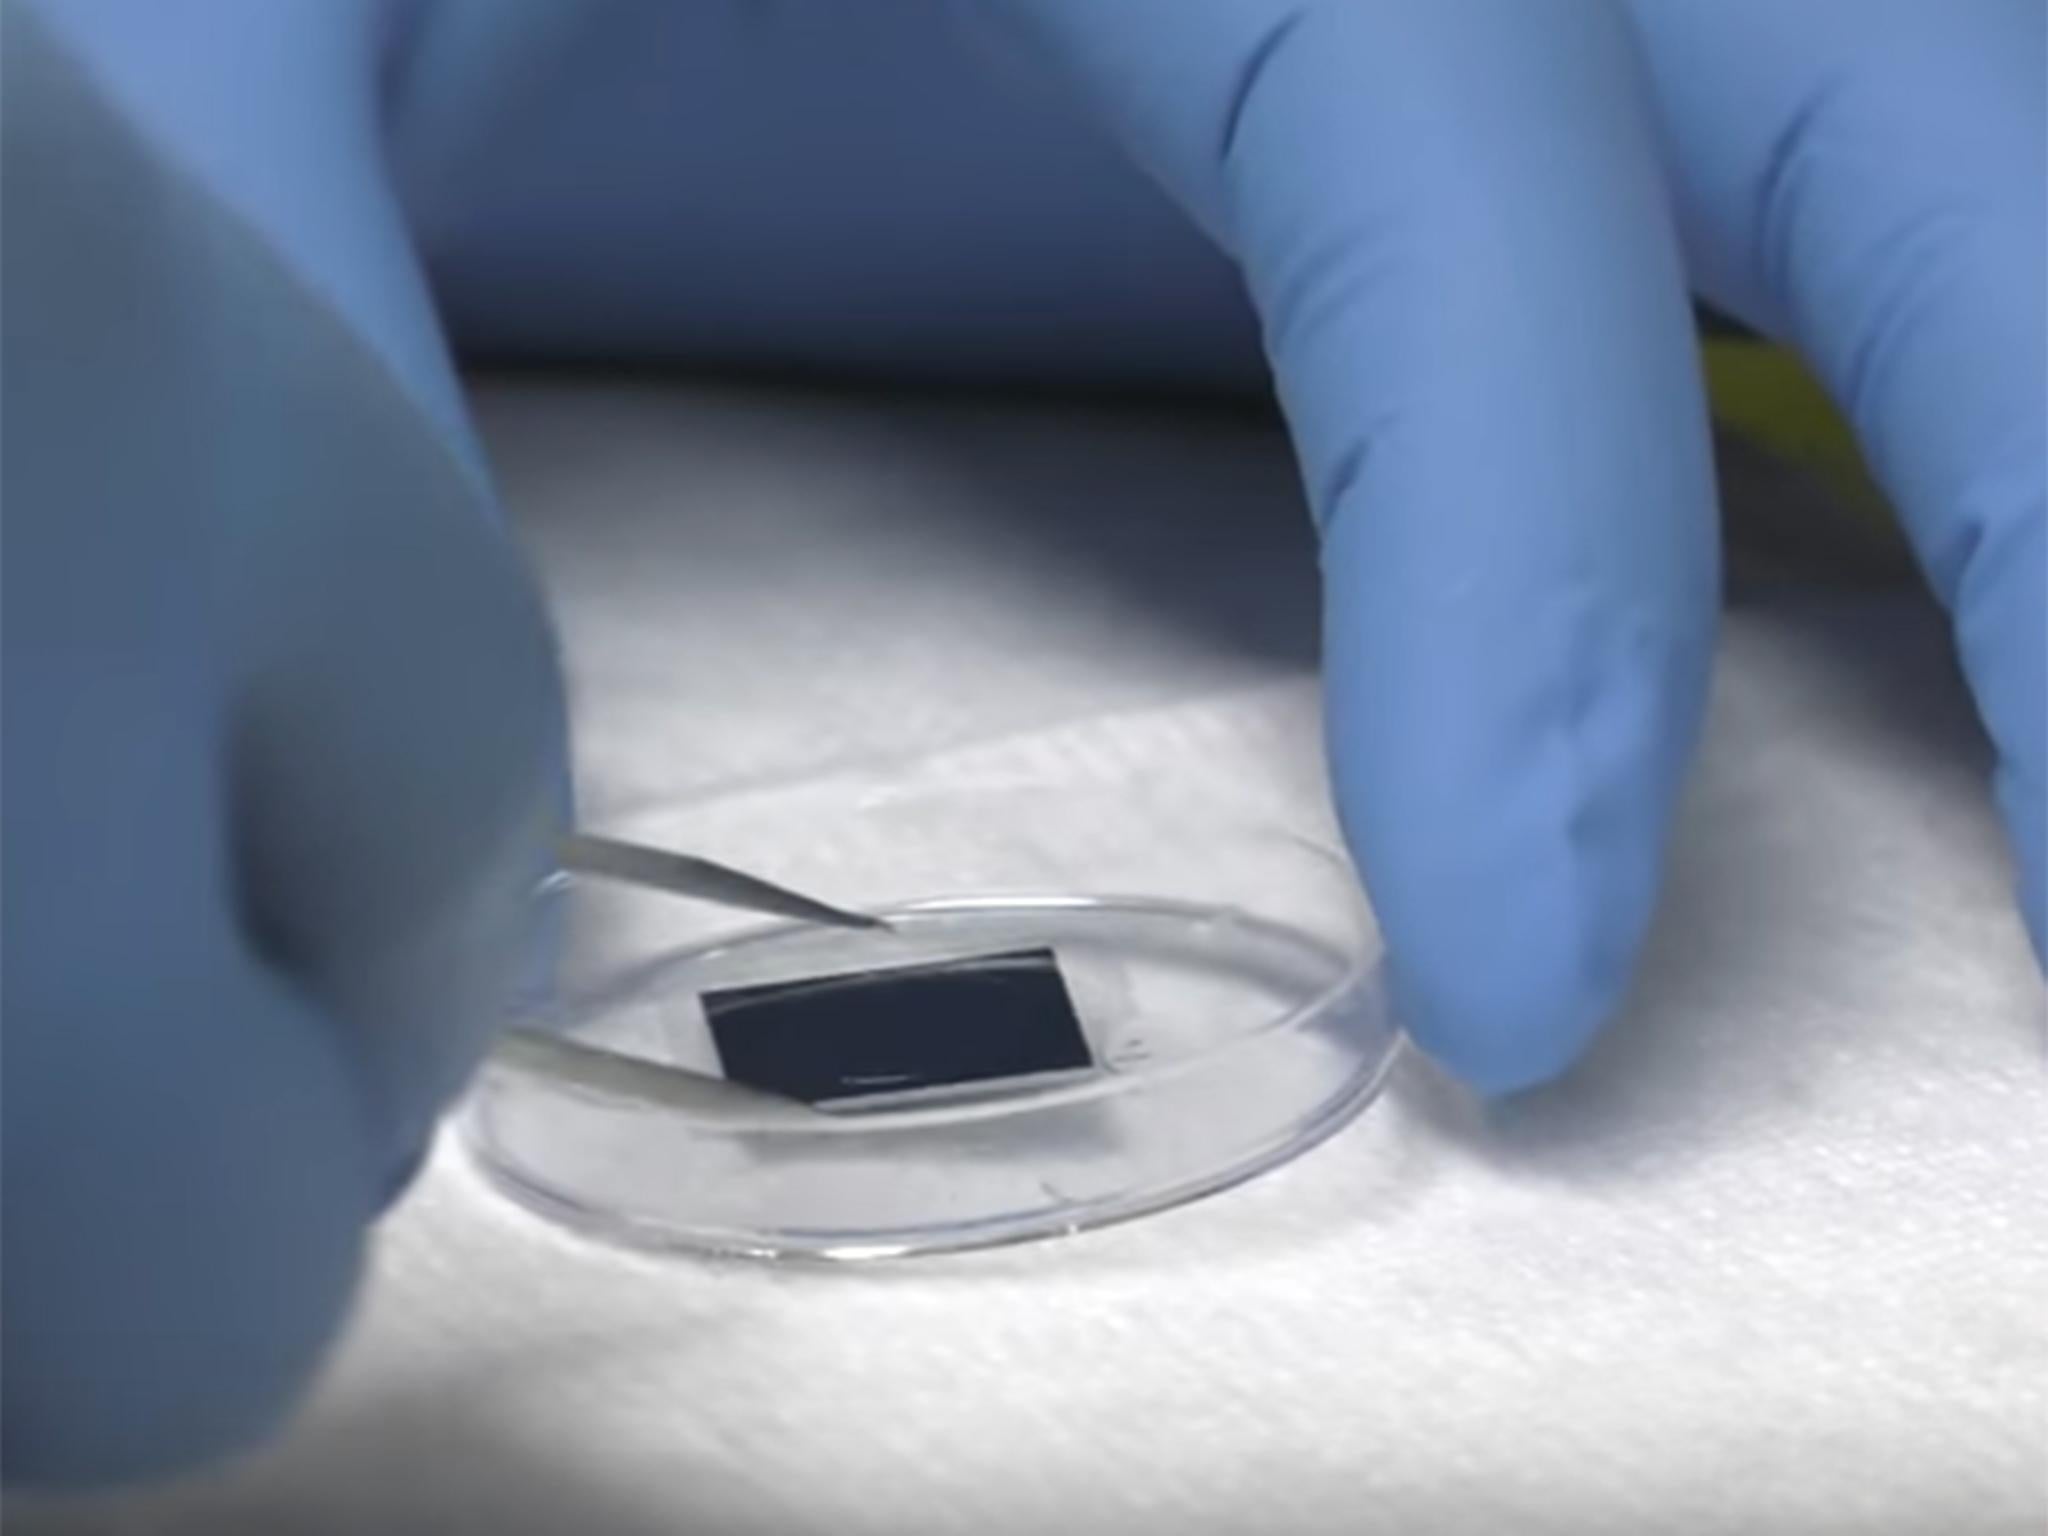 The chip could potentially be used to treat a range of conditions, including Alzheimer's and Parkinson's